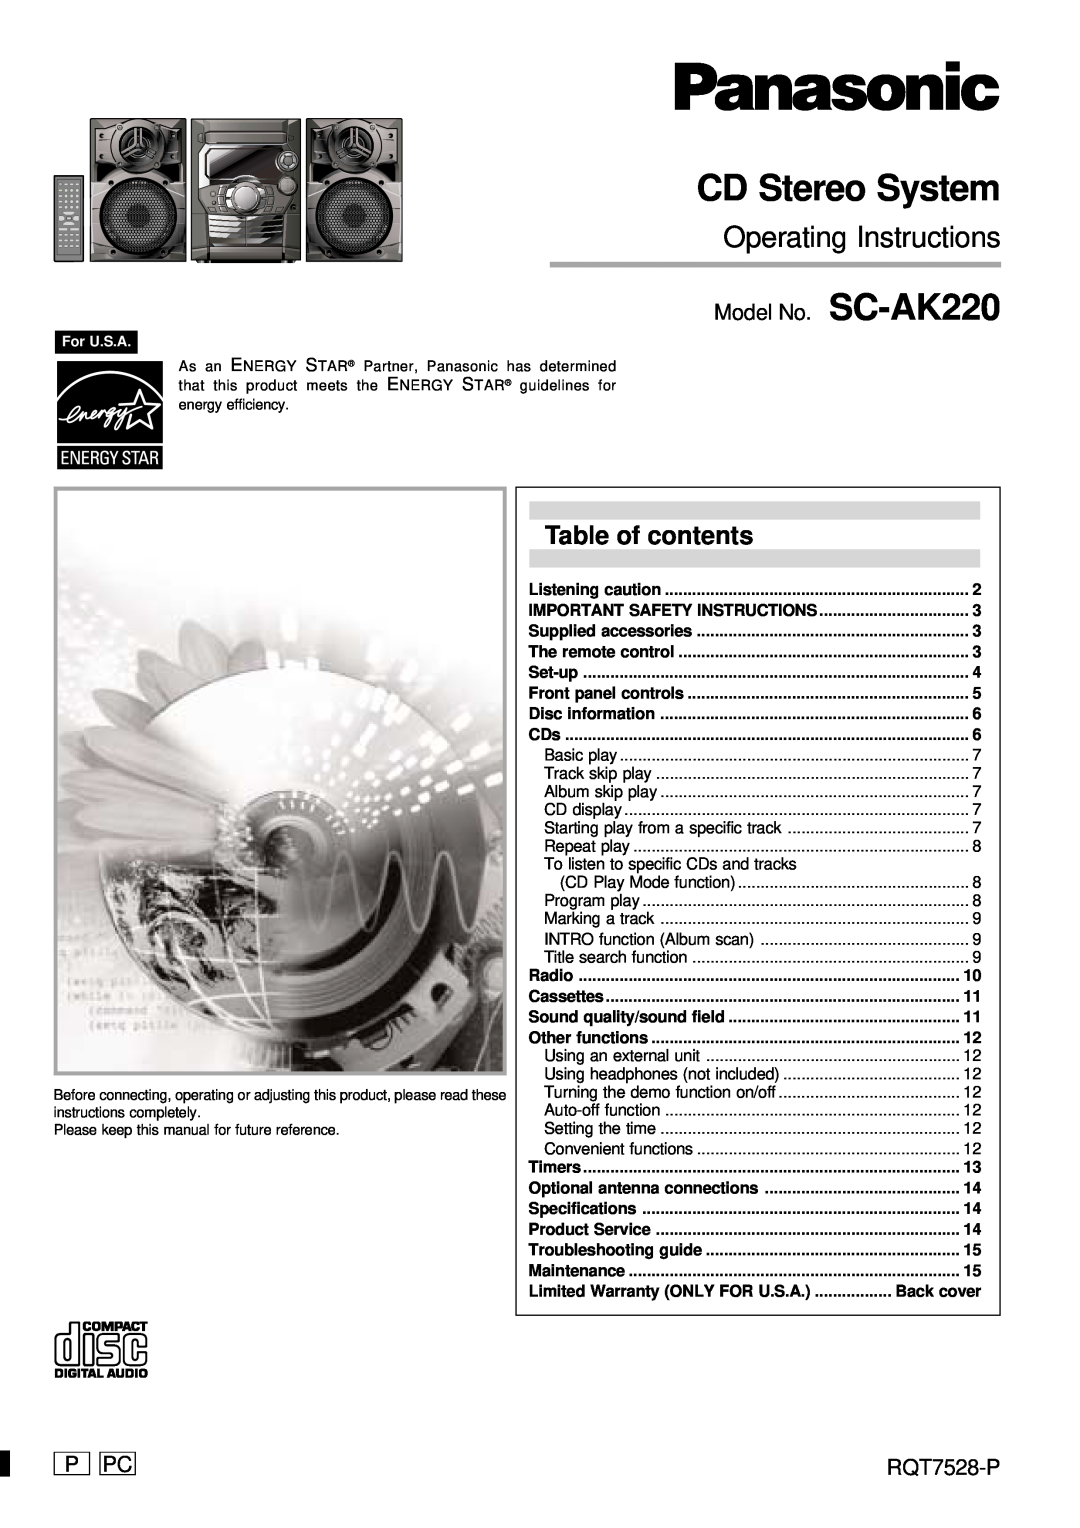 Panasonic operating instructions Table of contents, Model No. SC-AK220, P Pc, RQT7528-P, CD Stereo System, For U.S.A 